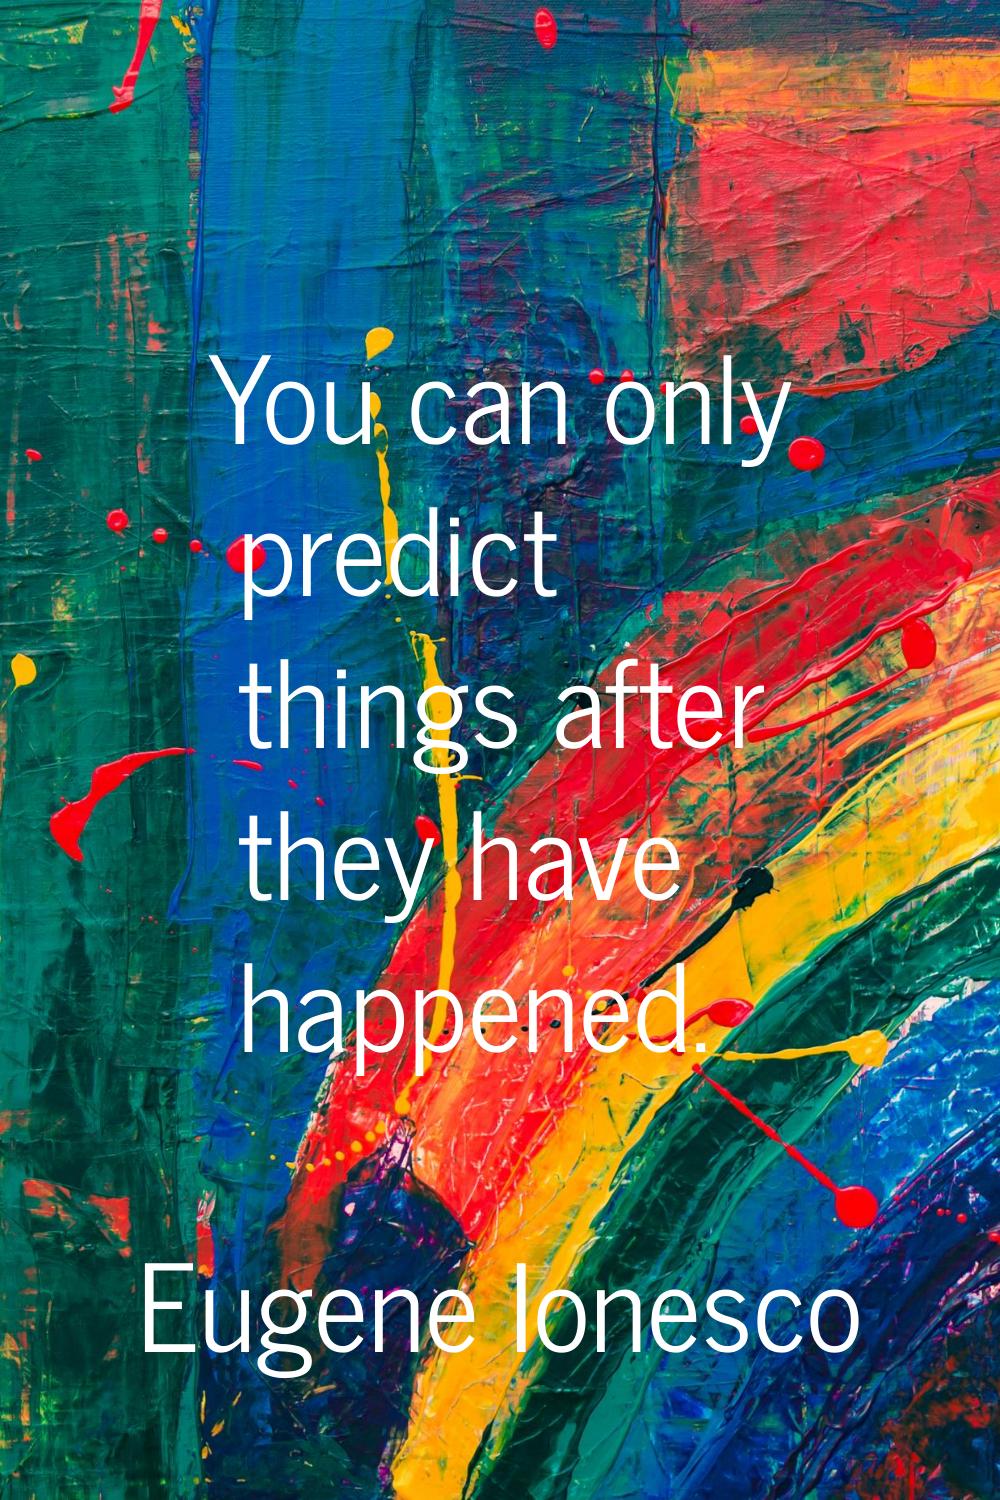 You can only predict things after they have happened.